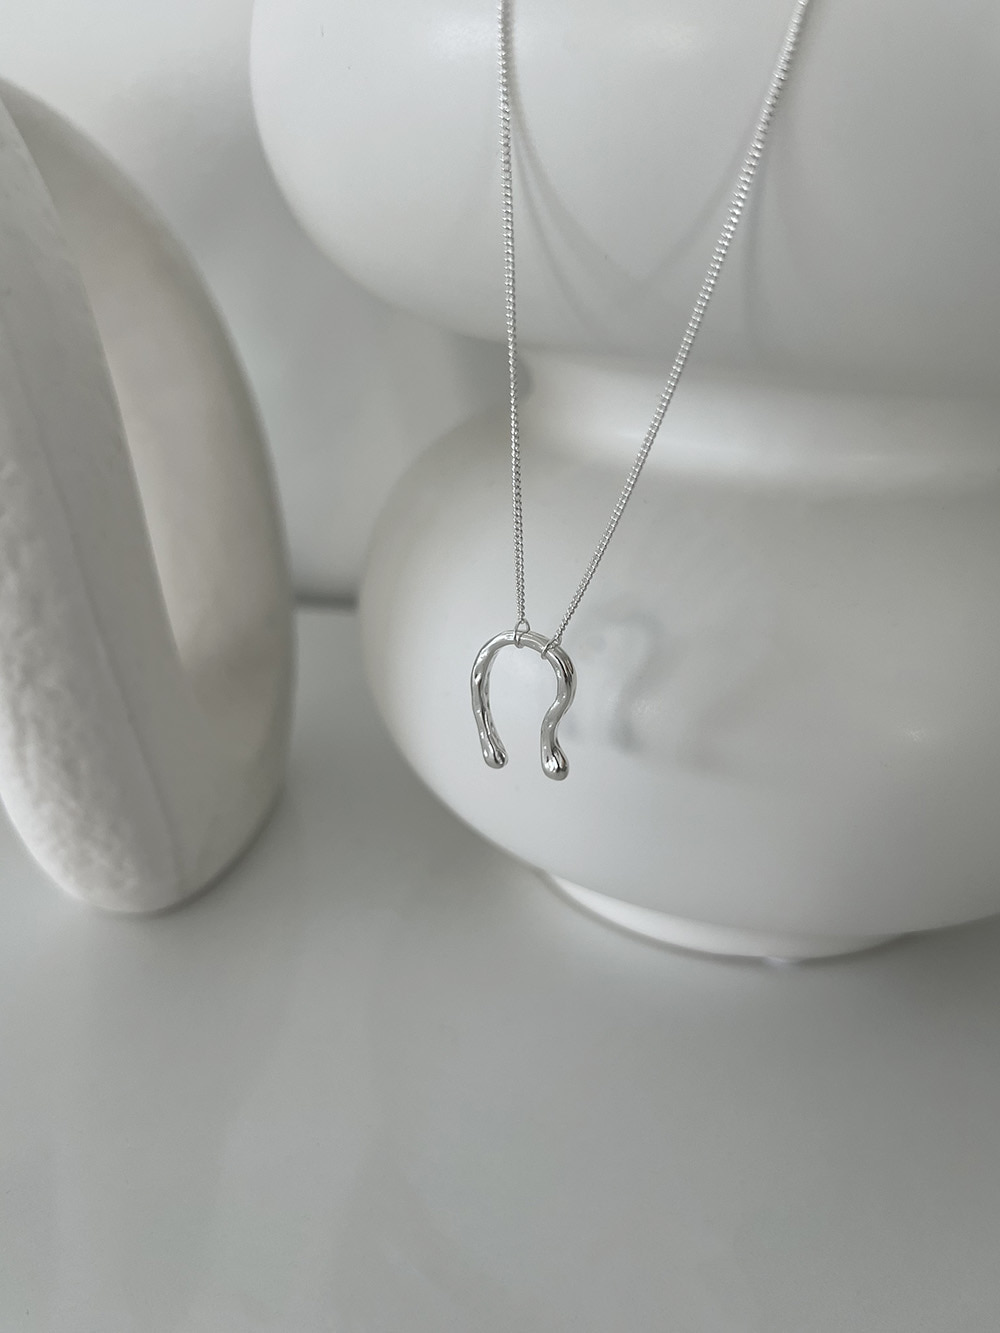 [92.5 silver] maagnet necklace